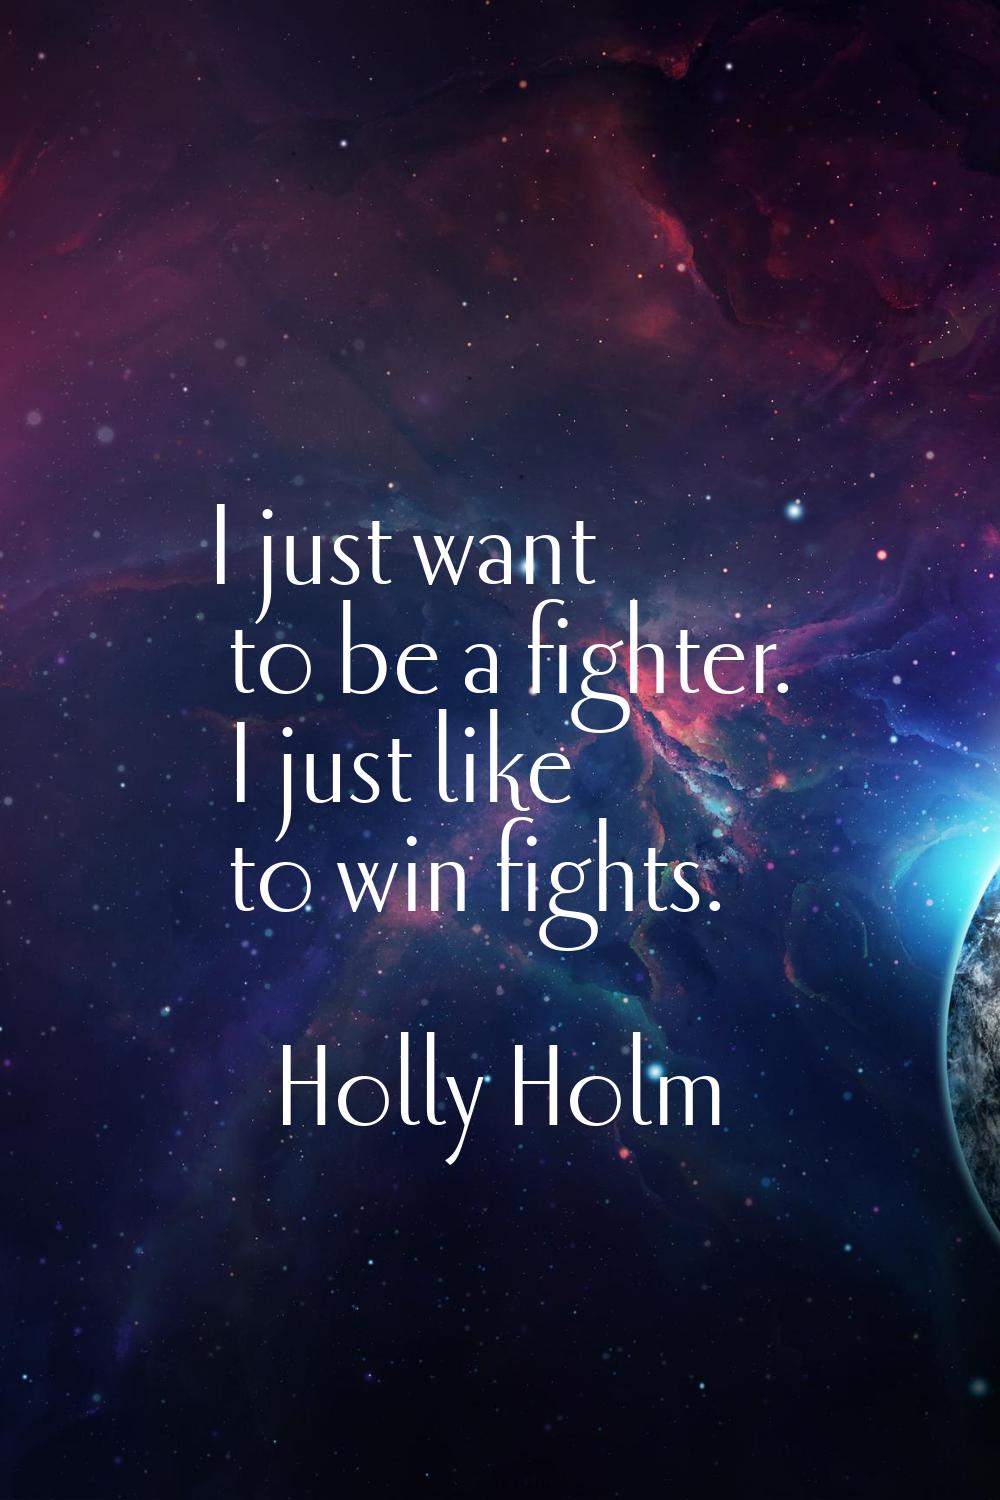 I just want to be a fighter. I just like to win fights.